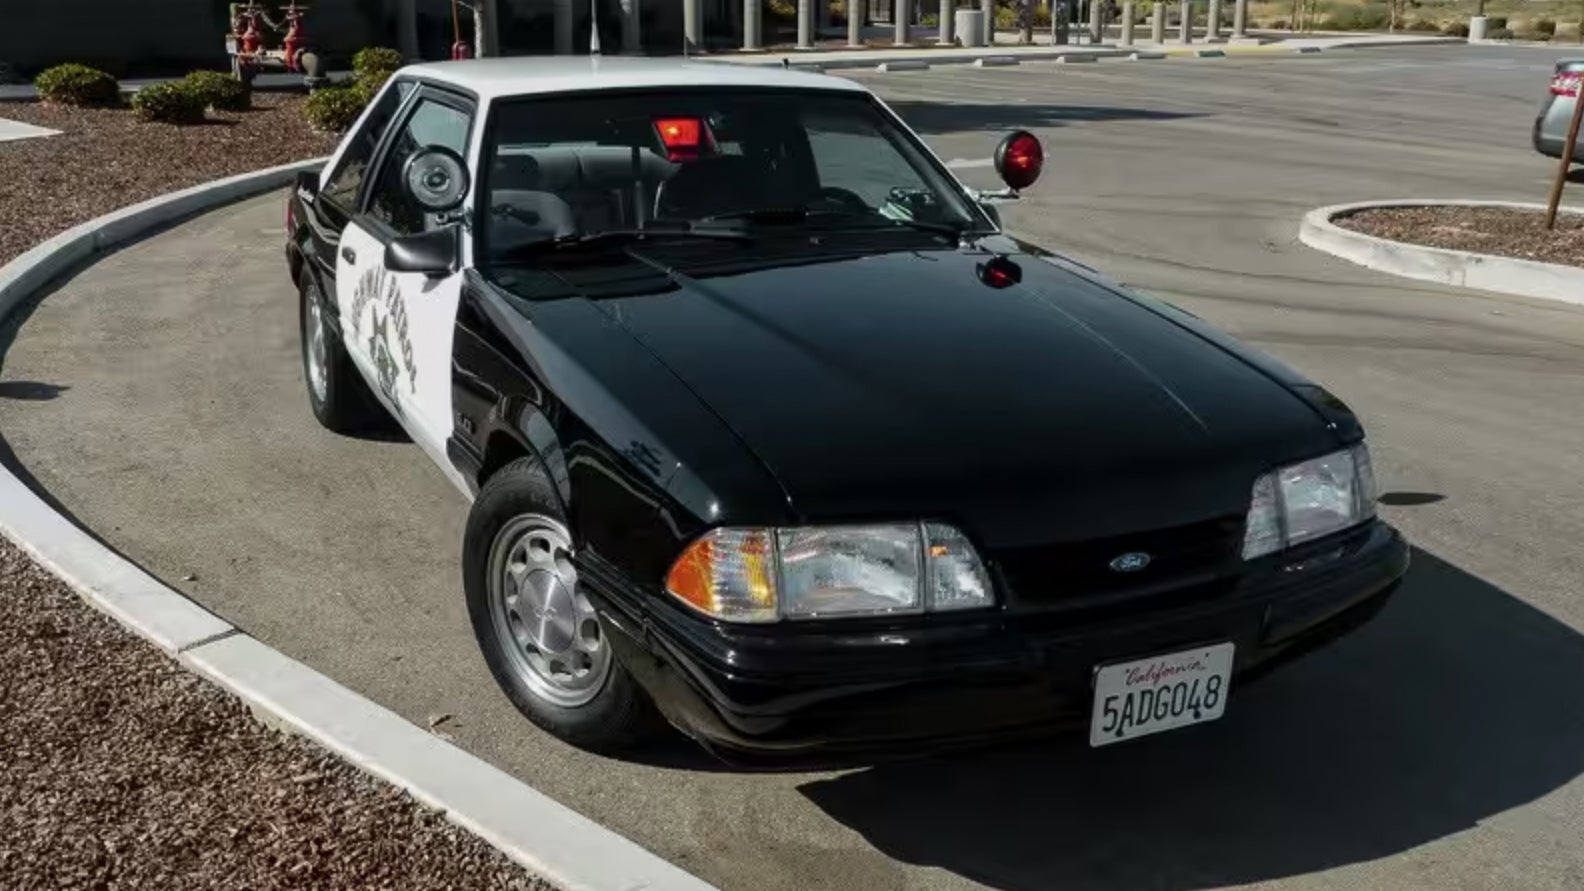 A Special Service Package Fox-body Mustang that had been used by the California Highway Patrol, recently restored to its former glory.